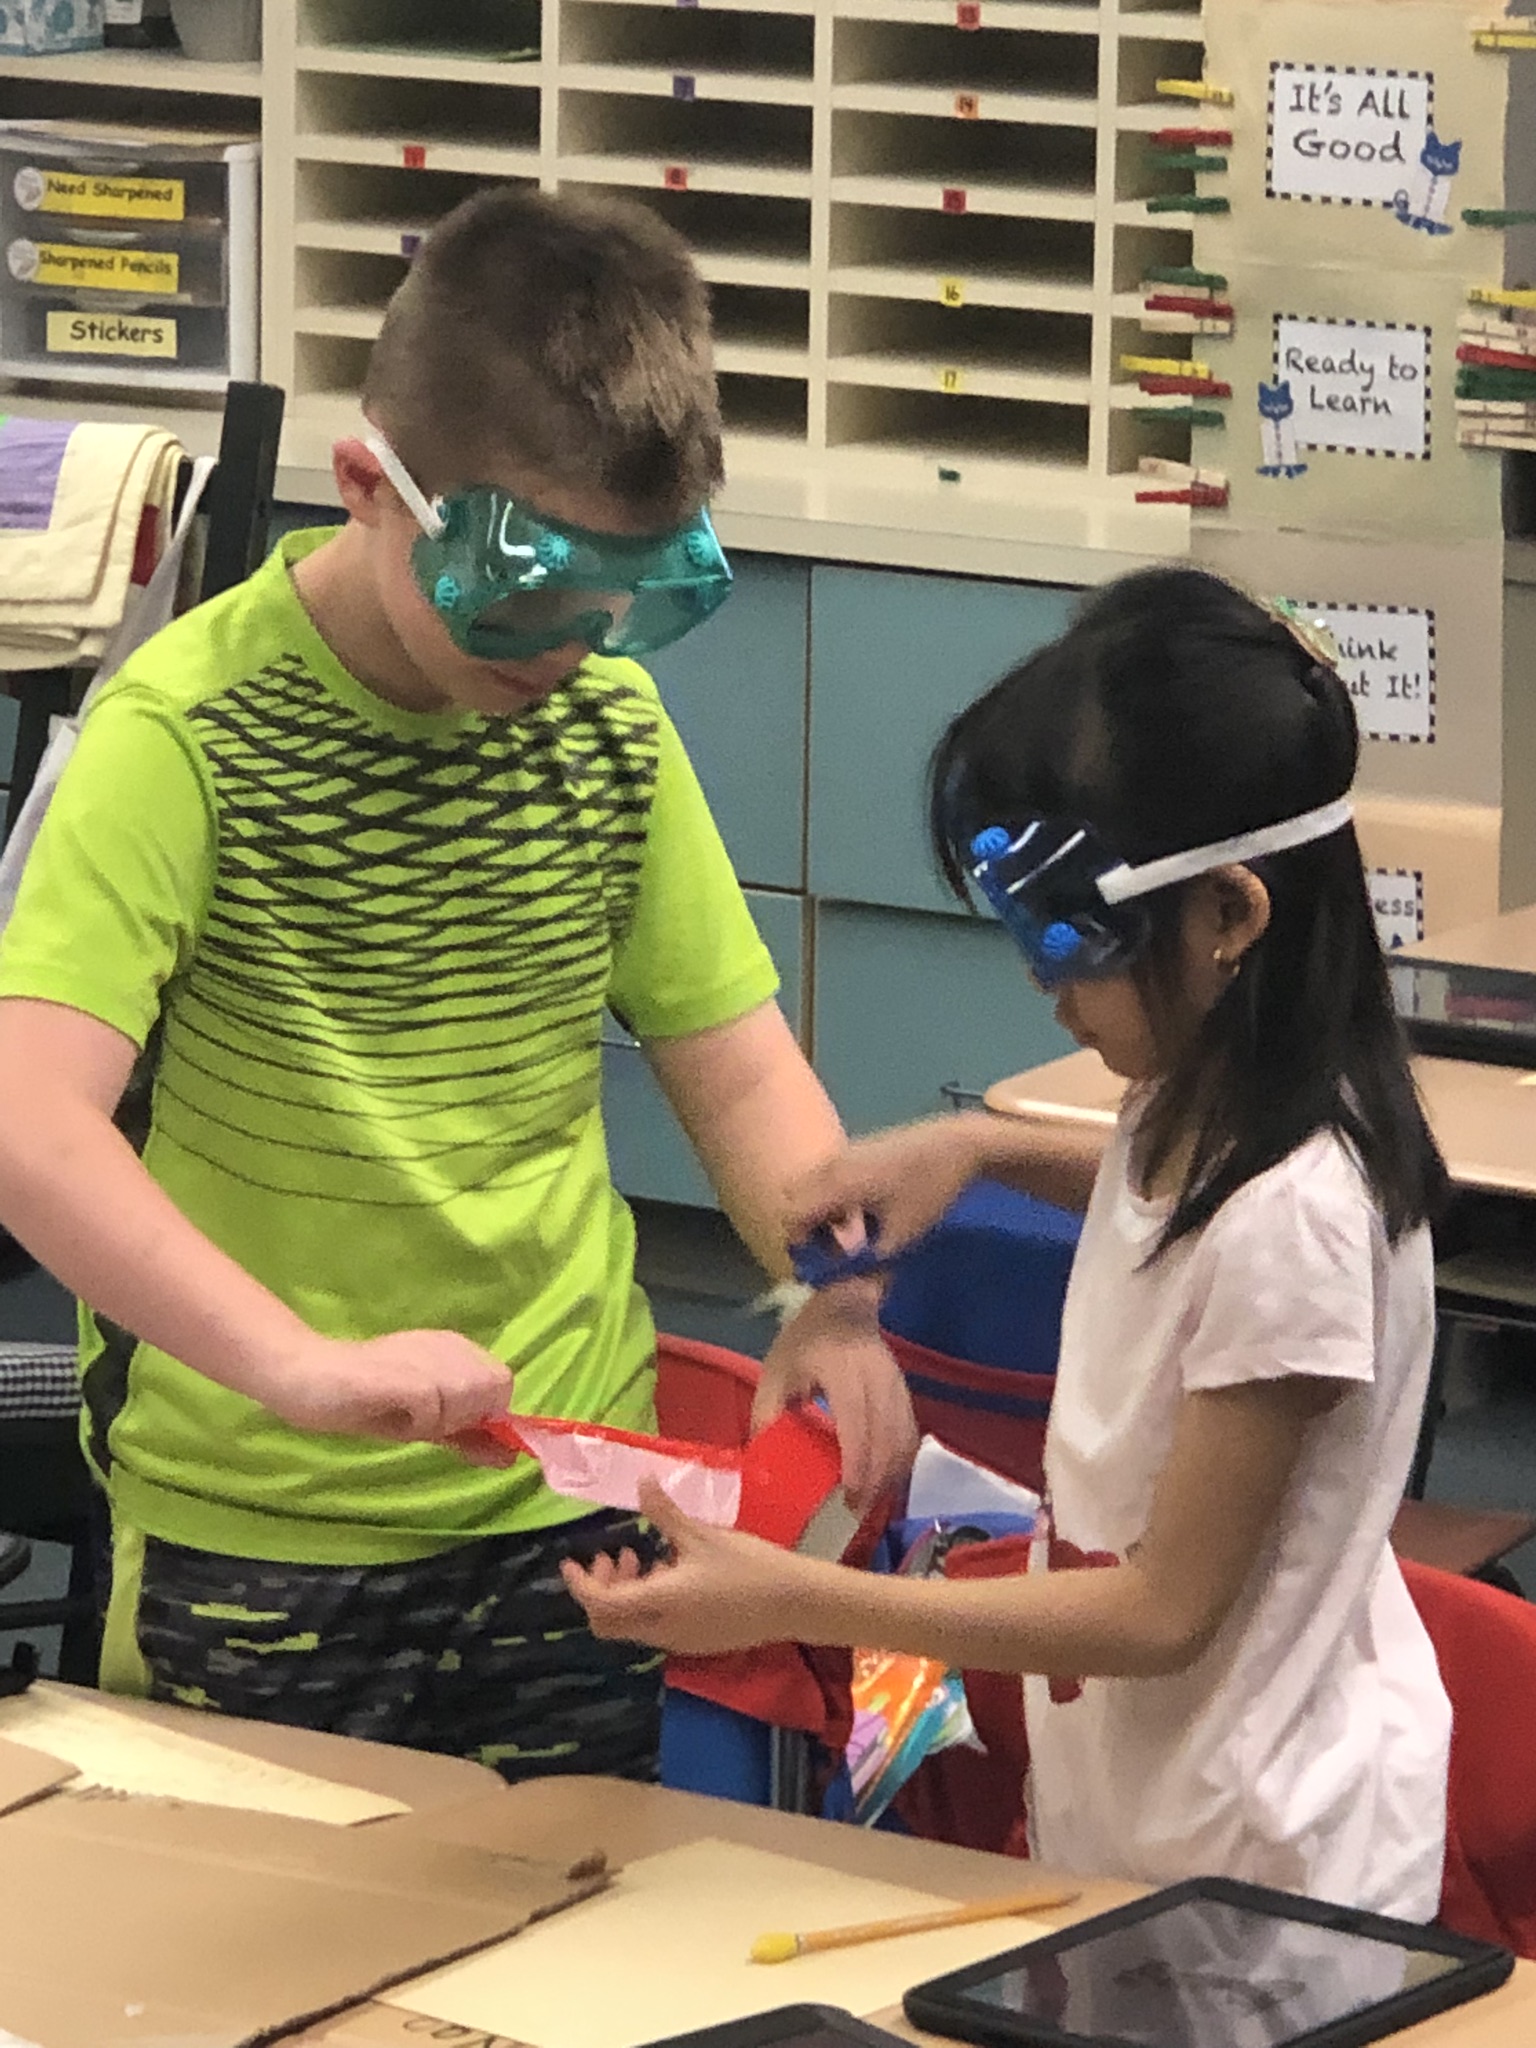 A young male and female student working together on a STEM project.